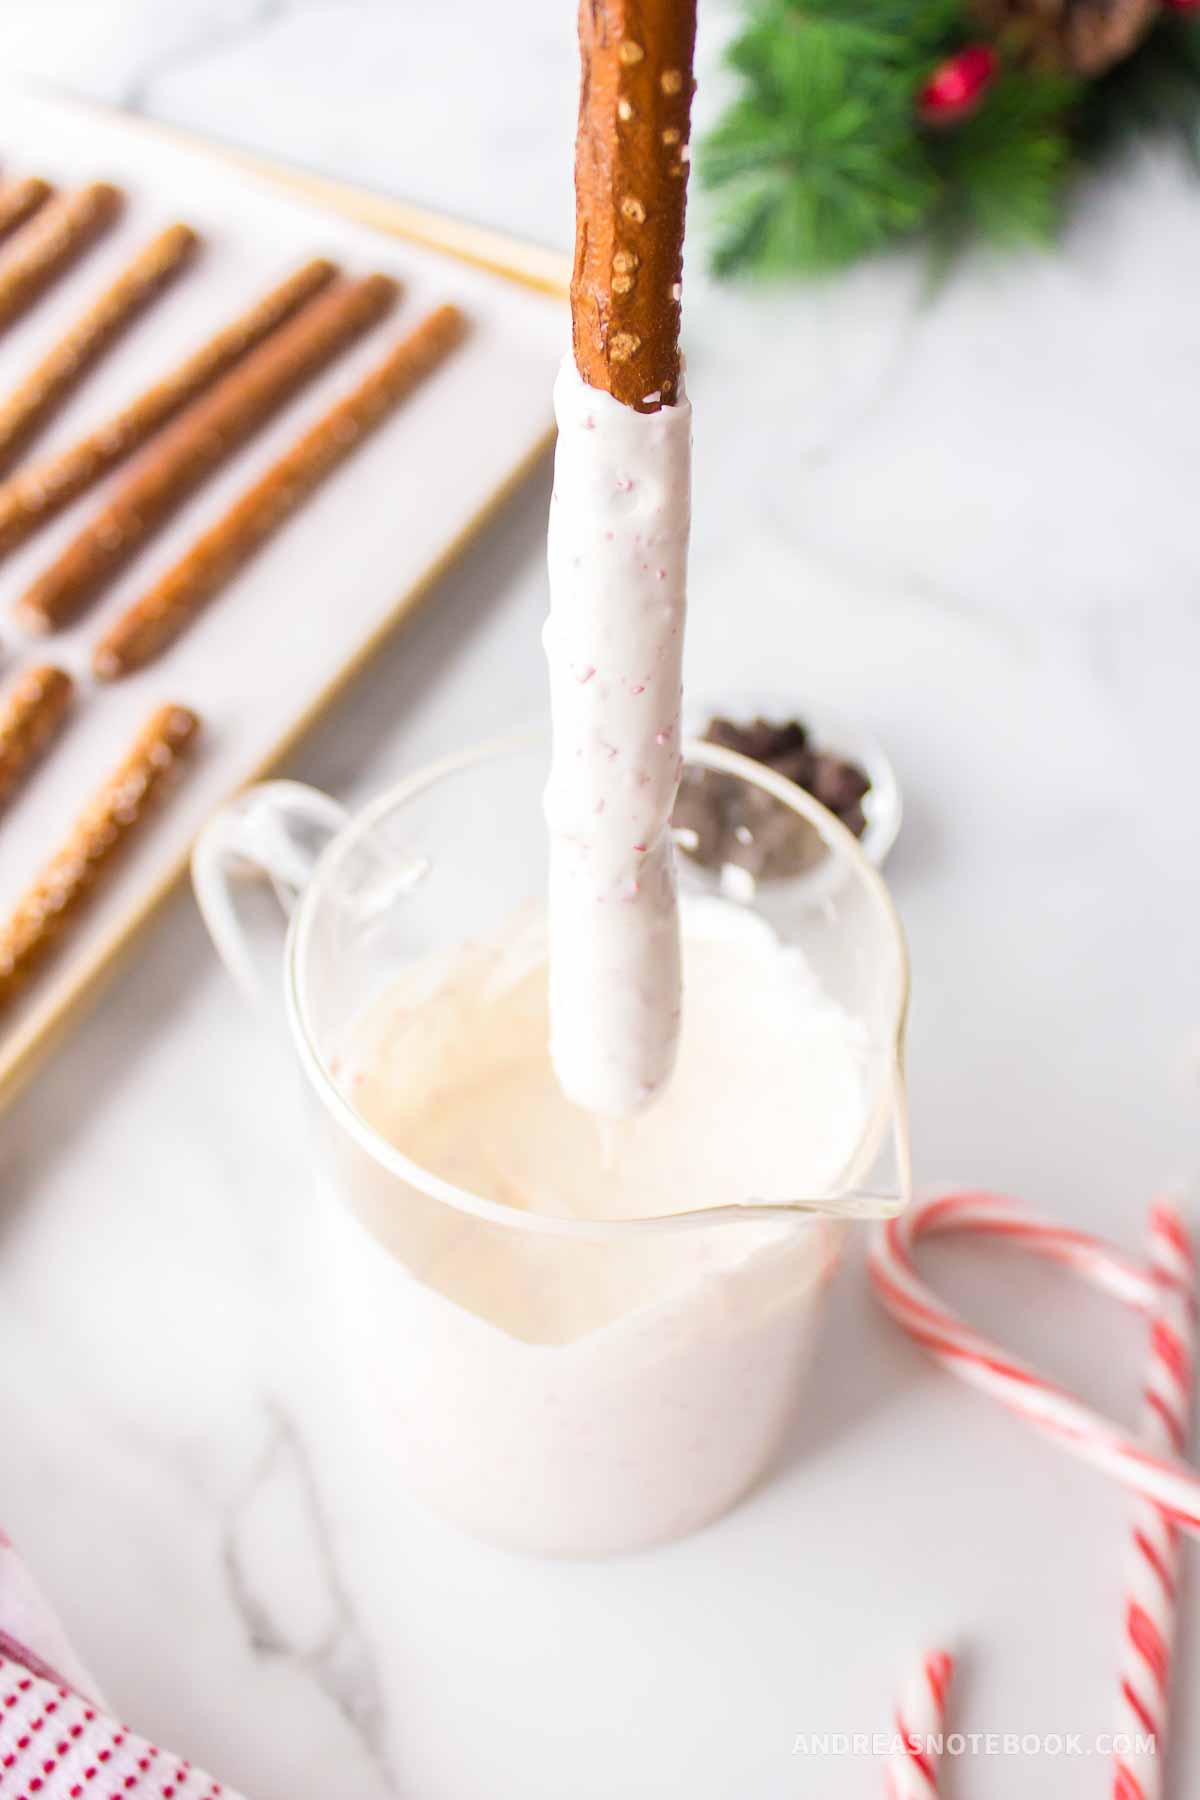 White chocolate peppermint candy melted in a glass measuring cup with a pretzel rod dipped in.